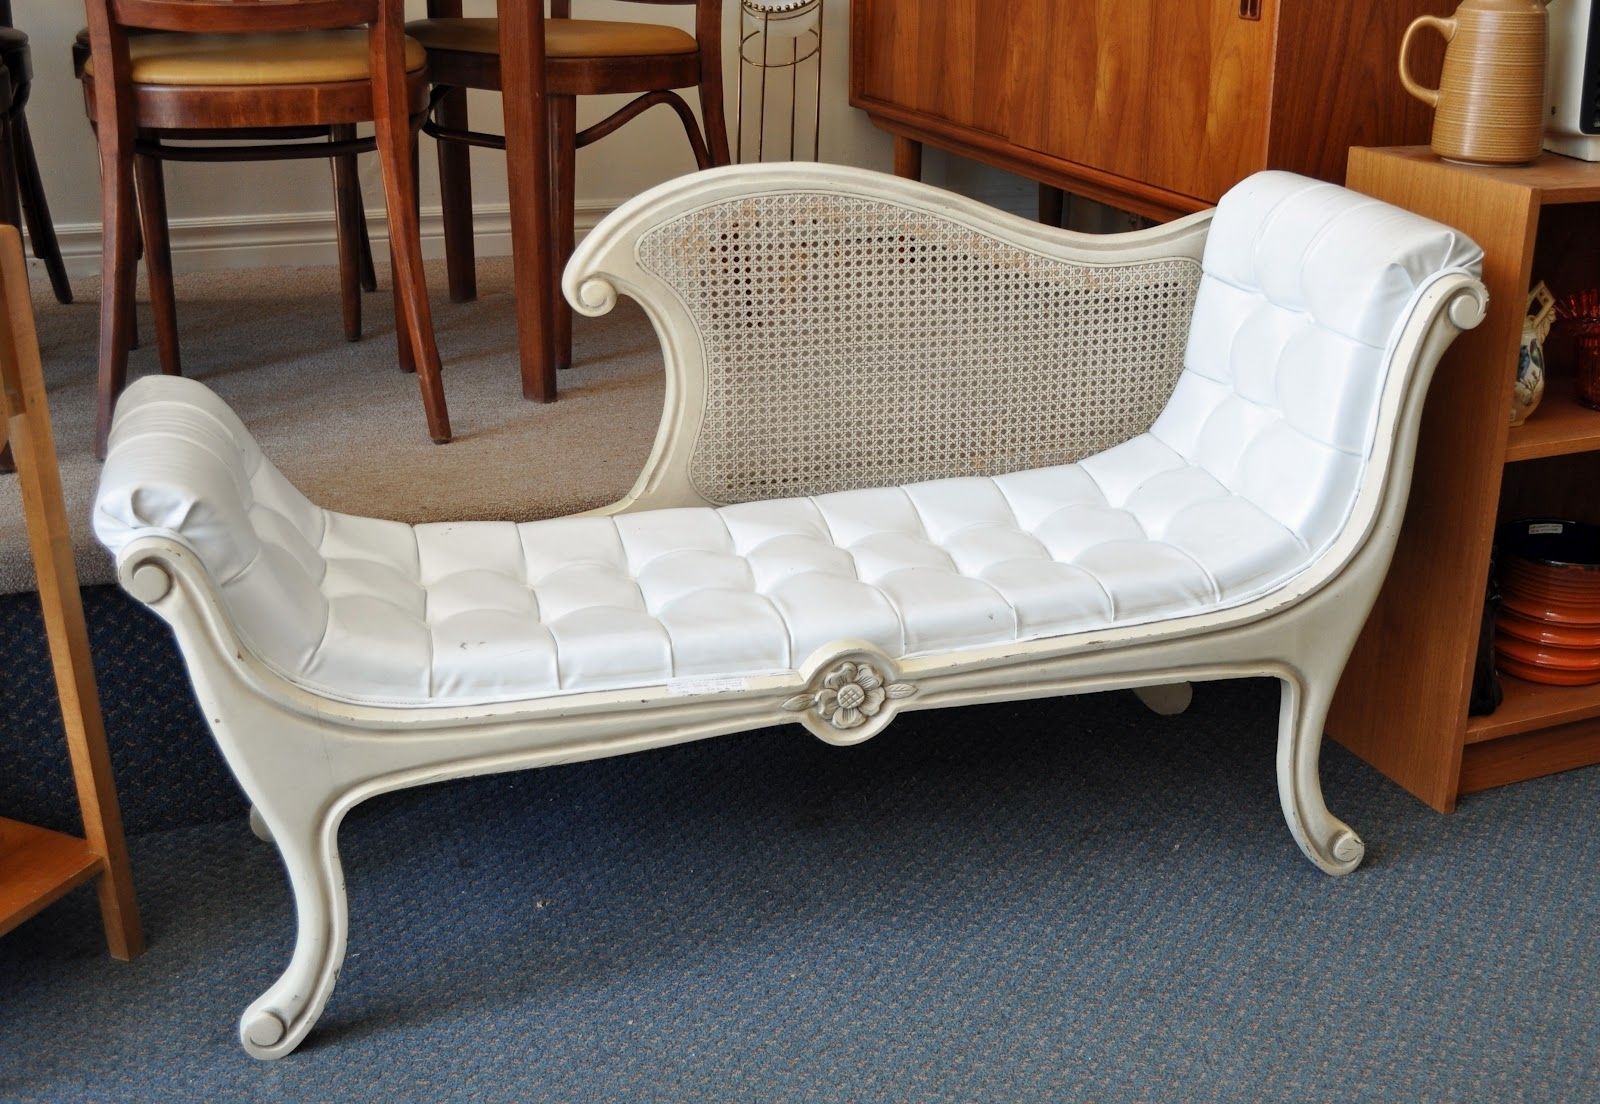 Victorian Chaise Lounge Chairs For Current Victorian Chaise Lounge Styles (View 13 of 15)